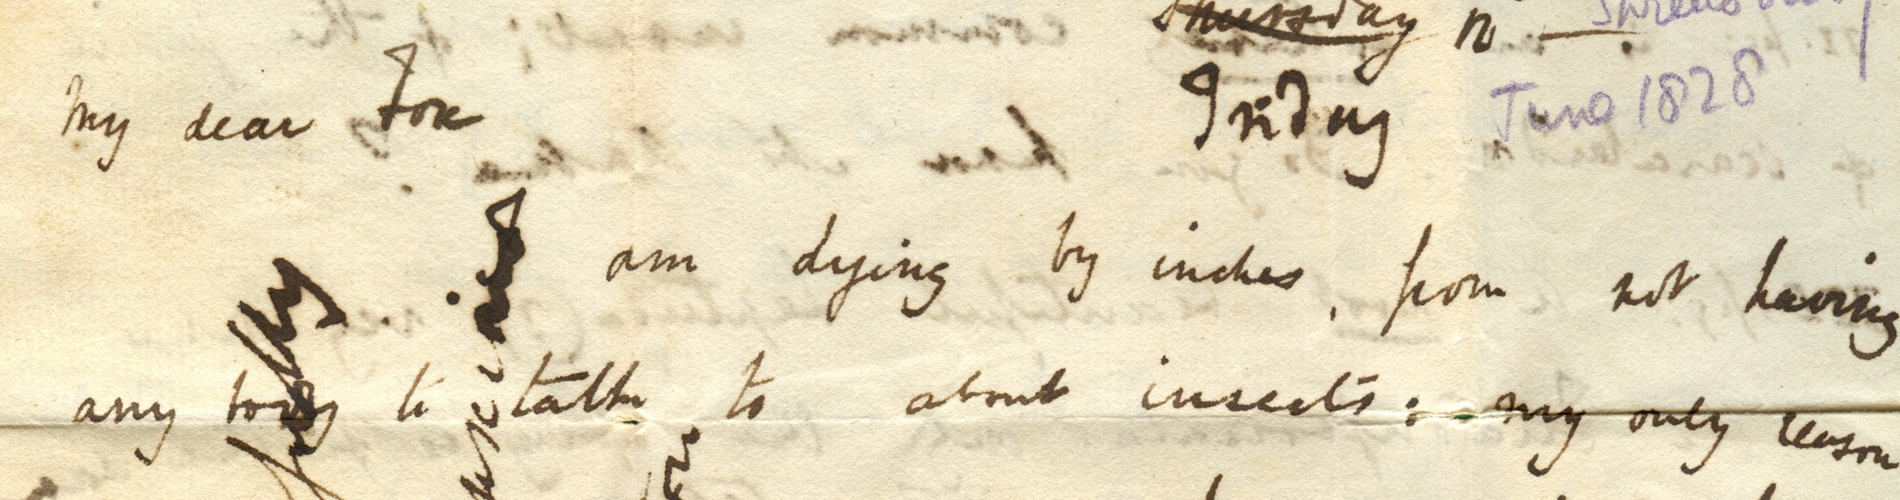 Extract from a letter by Charles Darwin